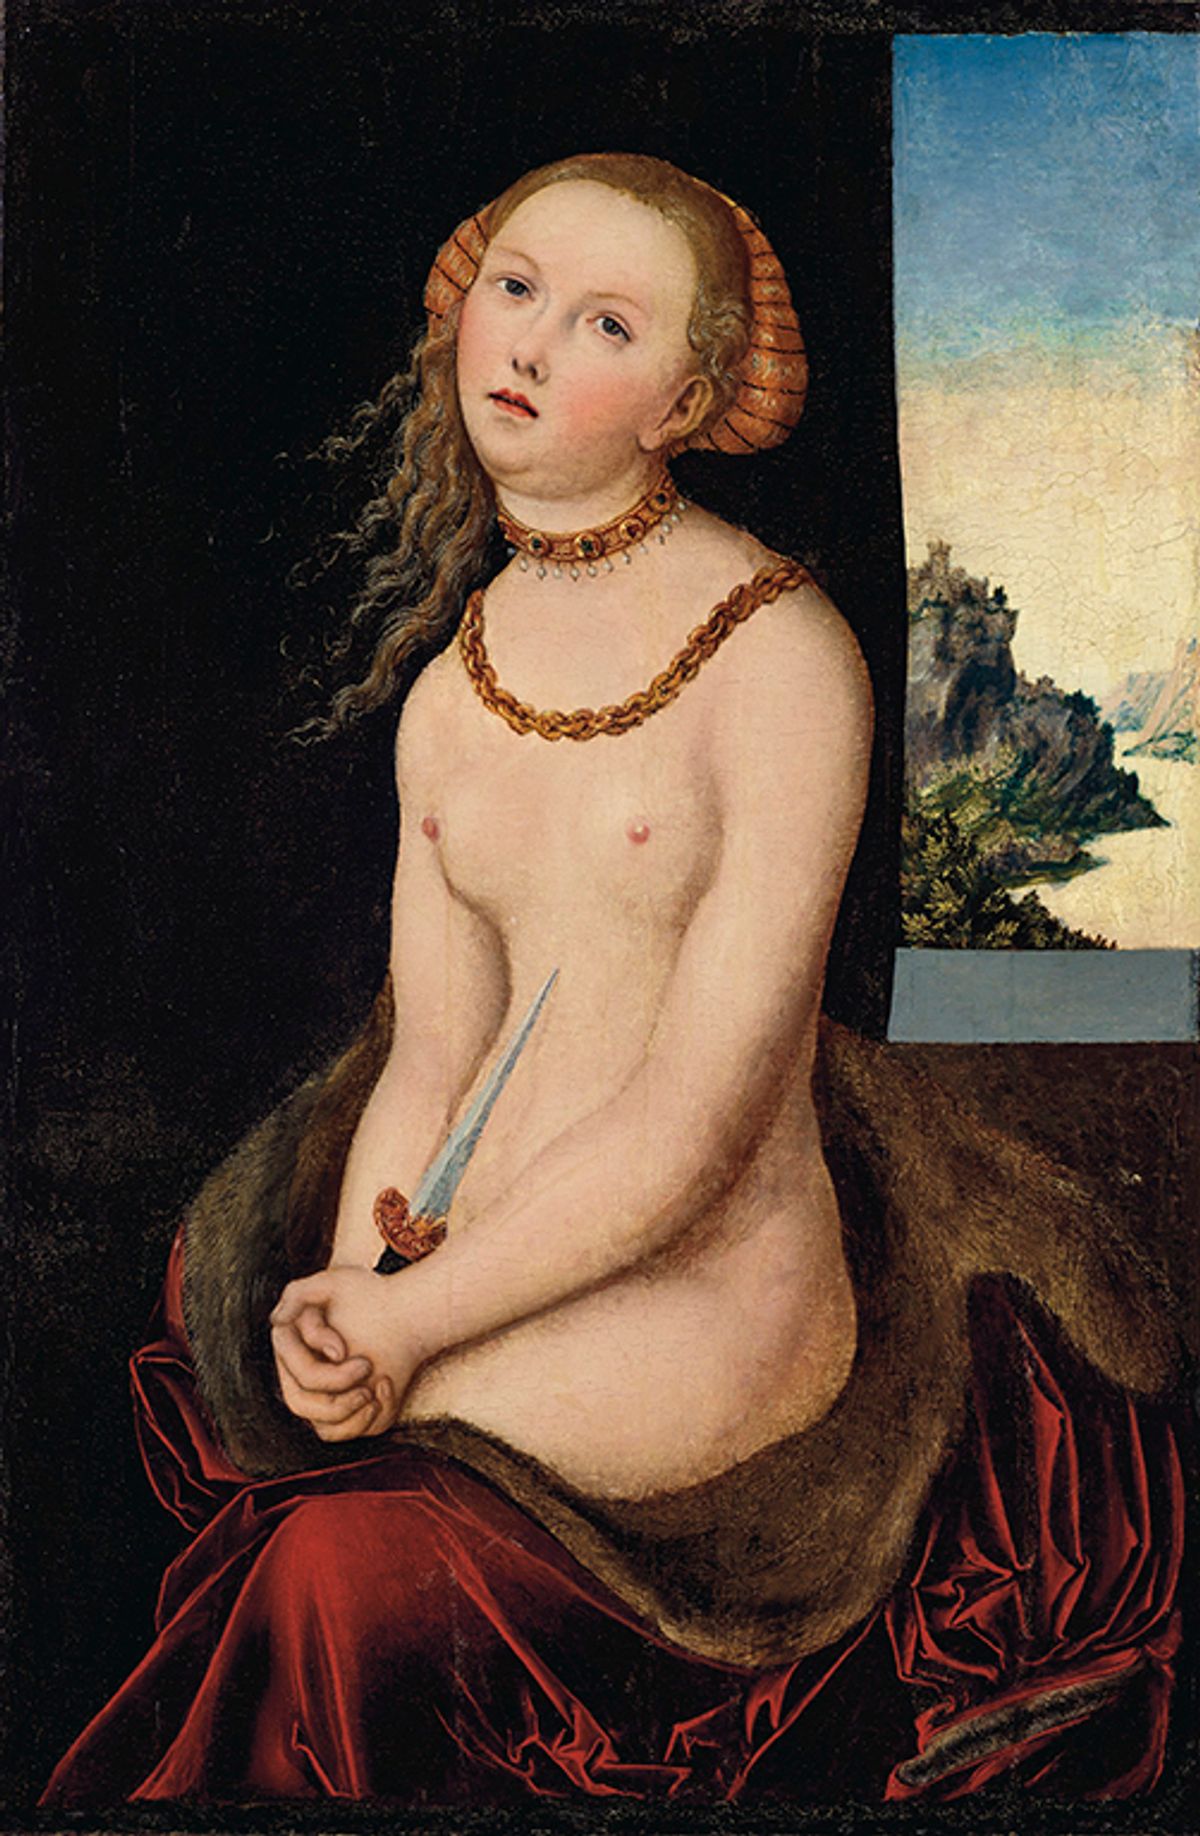 Lucas Cranach the Elder's Lucretia, which is to be auctioned at Christie's on 15 October 